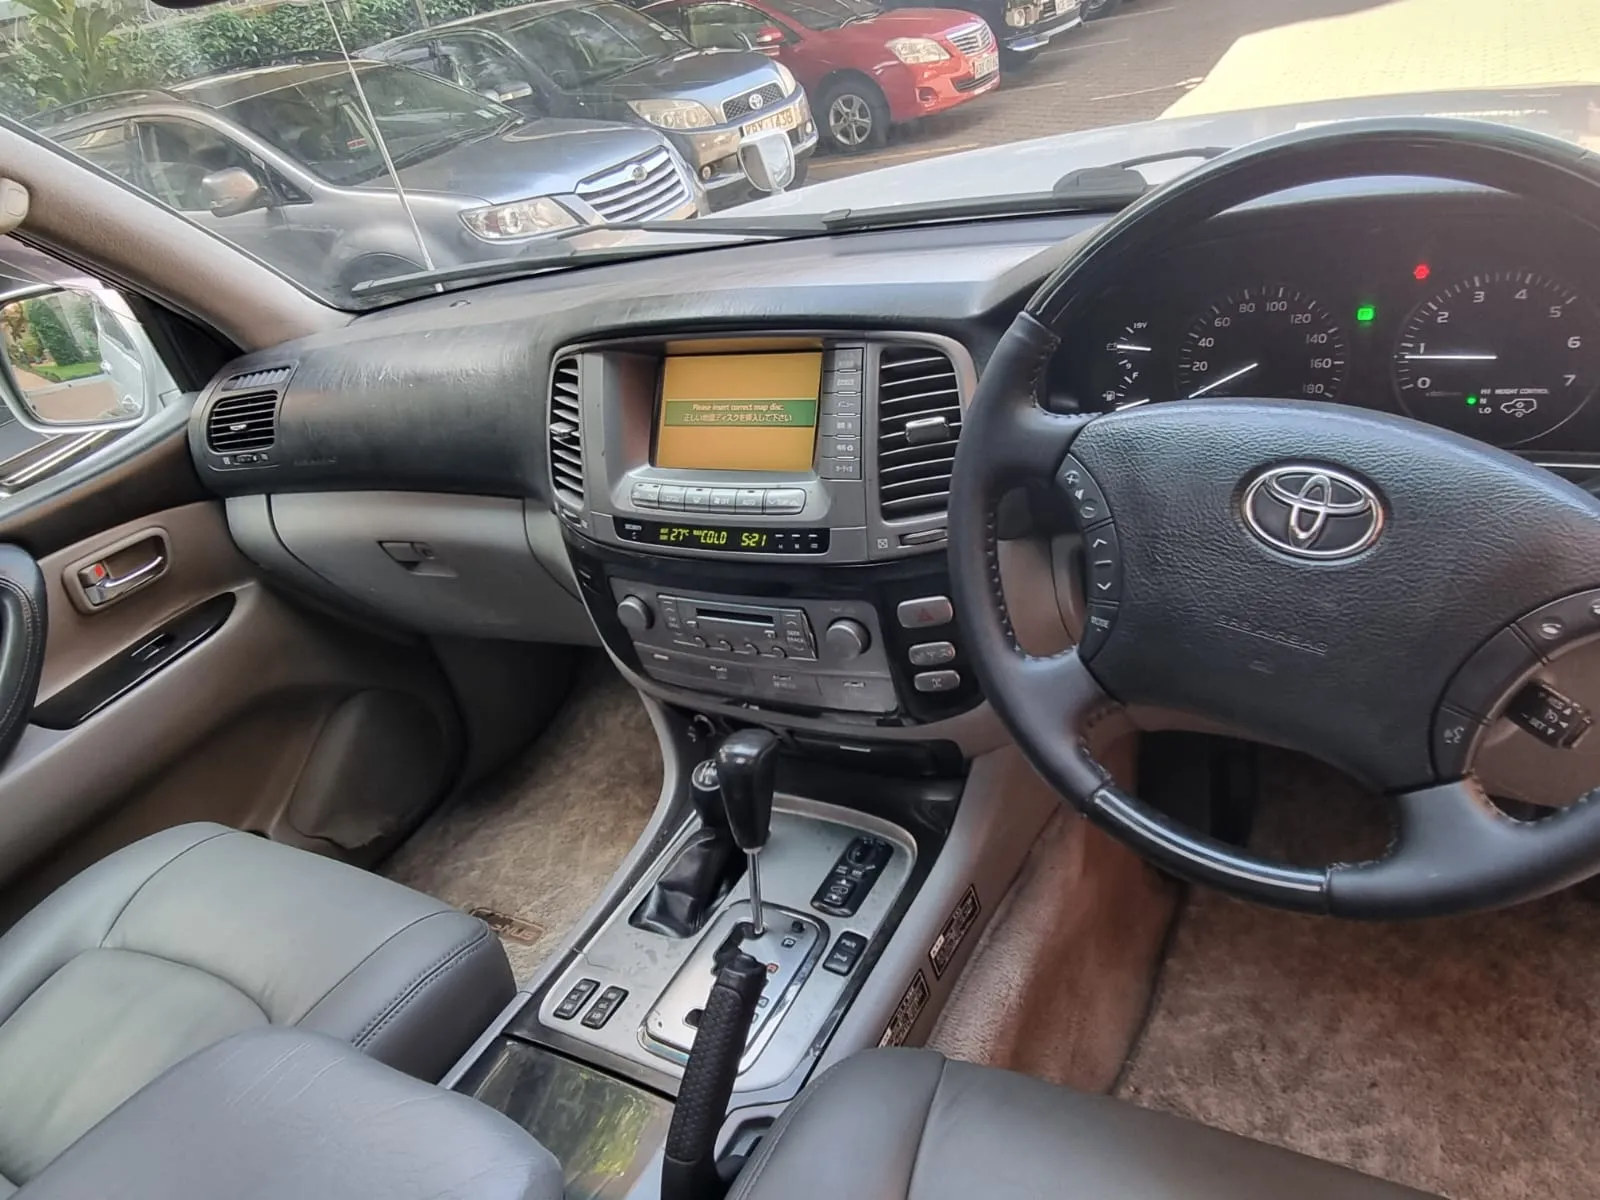 Toyota Land cruiser VX CYGNUS 2007 SUNROOF ASIAN OWNER 100 SERIES TRADE IN OK EXCLUSIVE